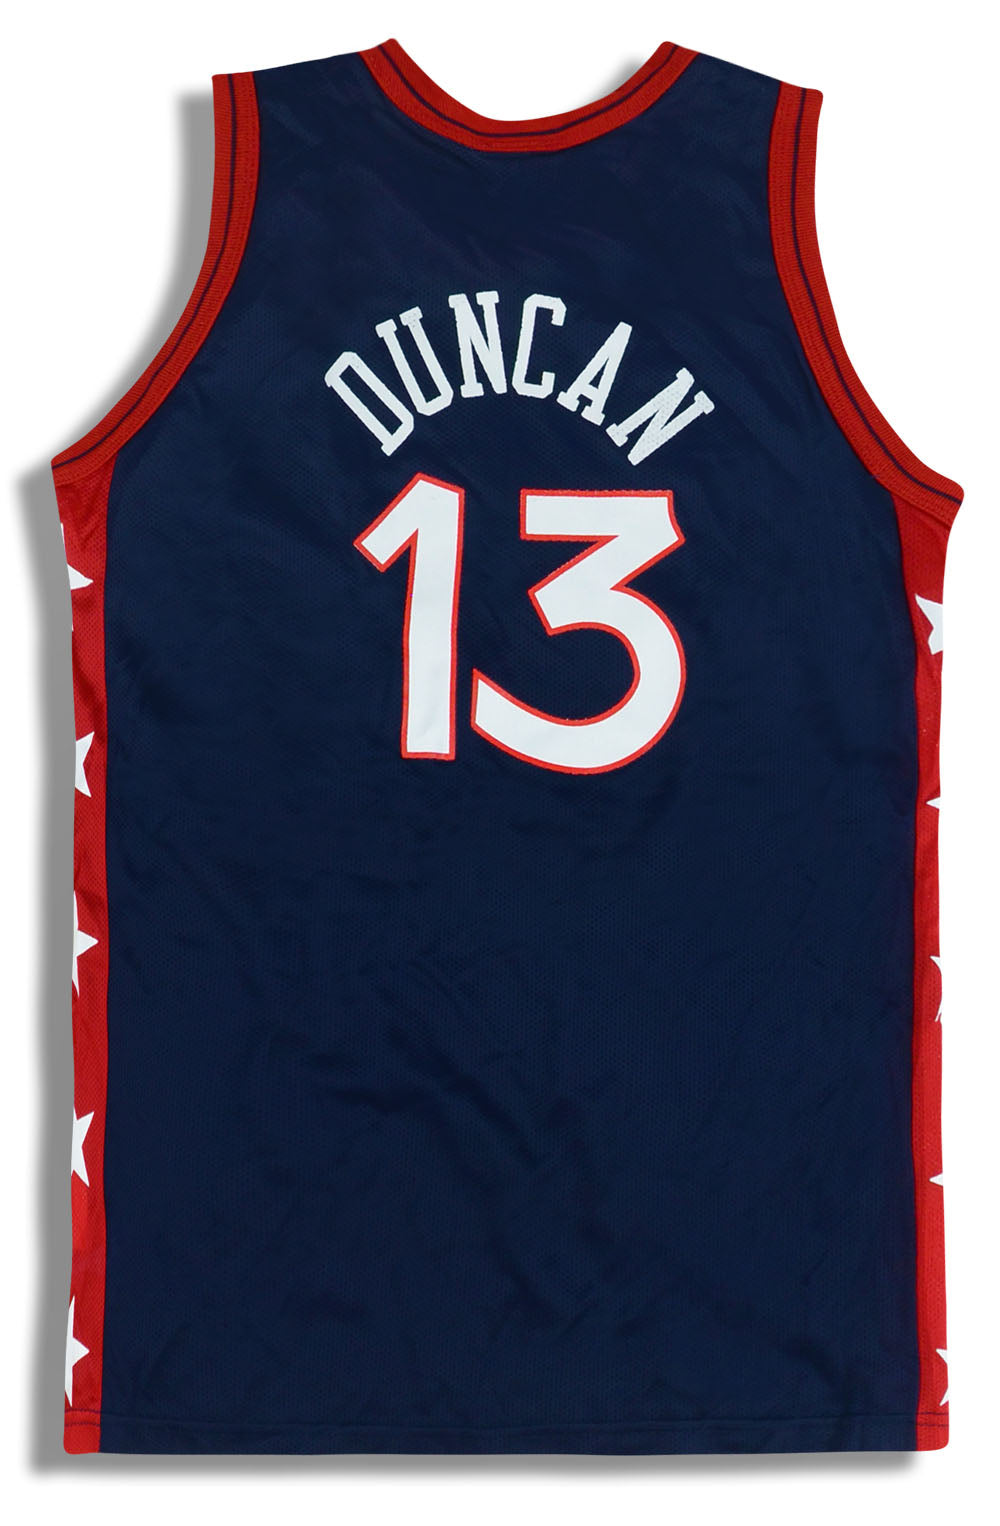 1999 USA DUNCAN #13 CHAMPION JERSEY (AWAY) Y